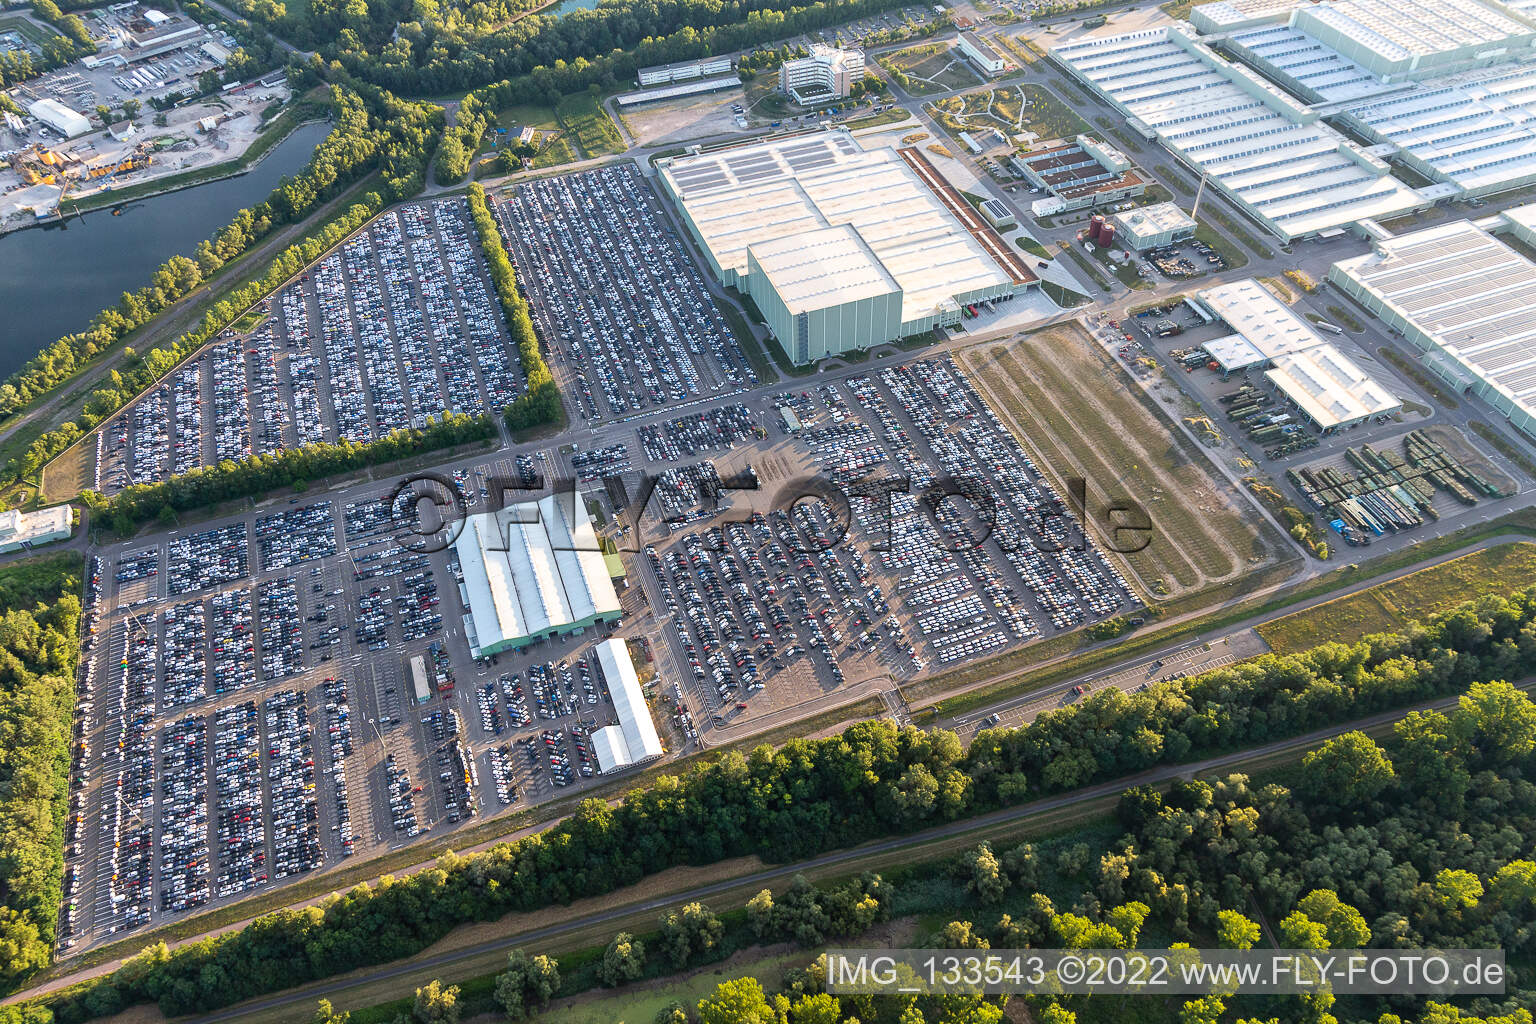 Mercedes-Benz Global Logistics Center on the island of Grün in Germersheim in the state Rhineland-Palatinate, Germany